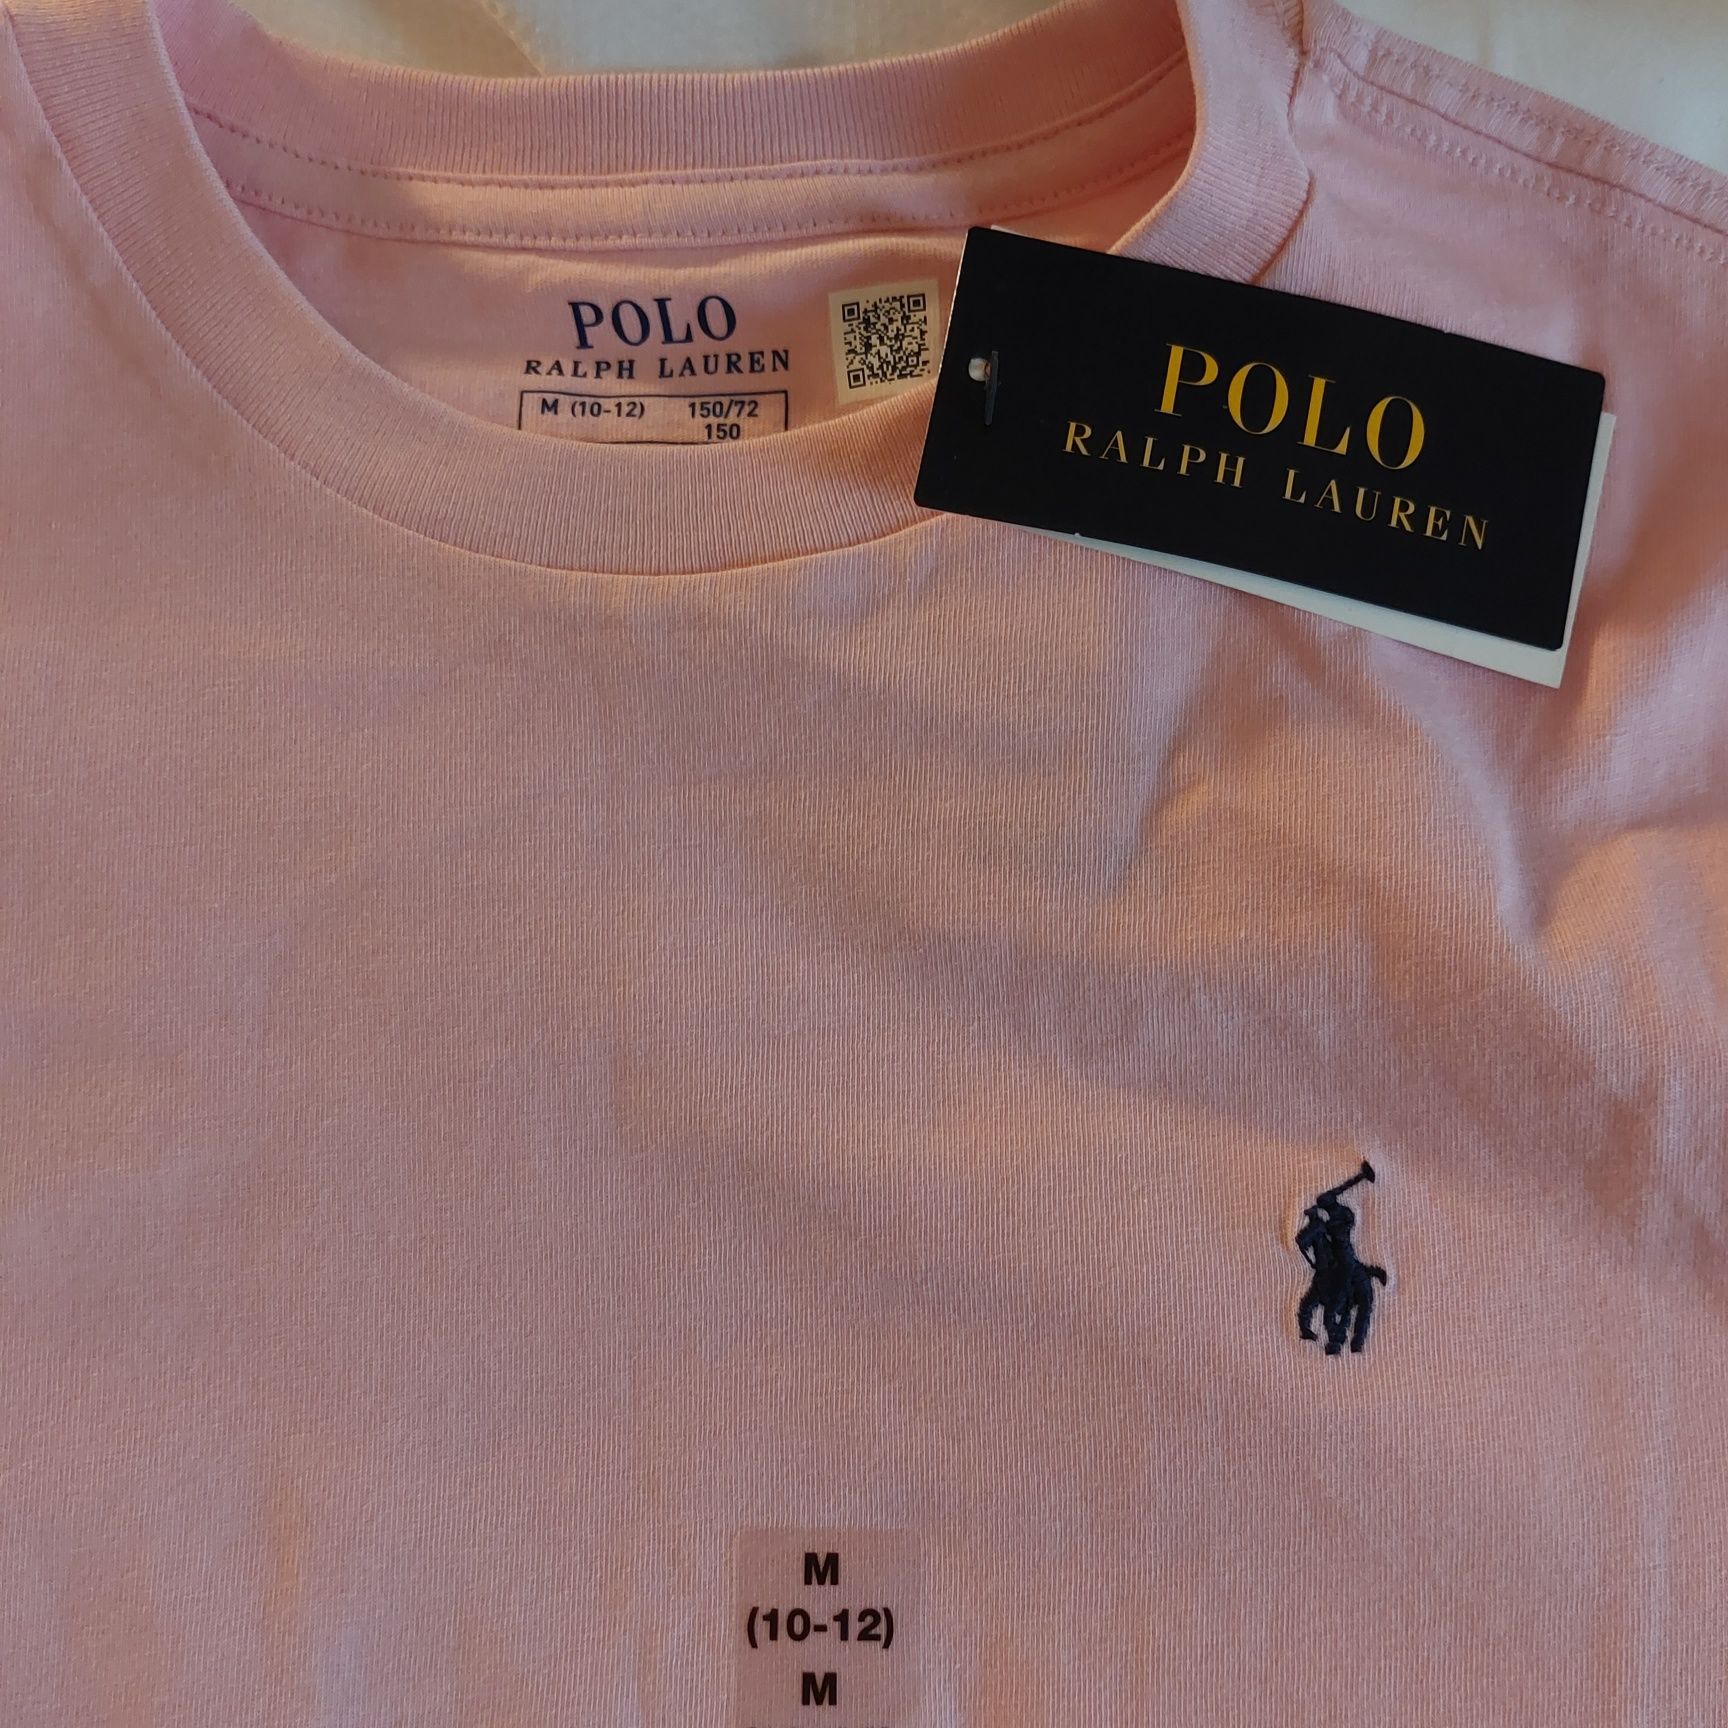 Polo by Ralph Lauren t-shirts